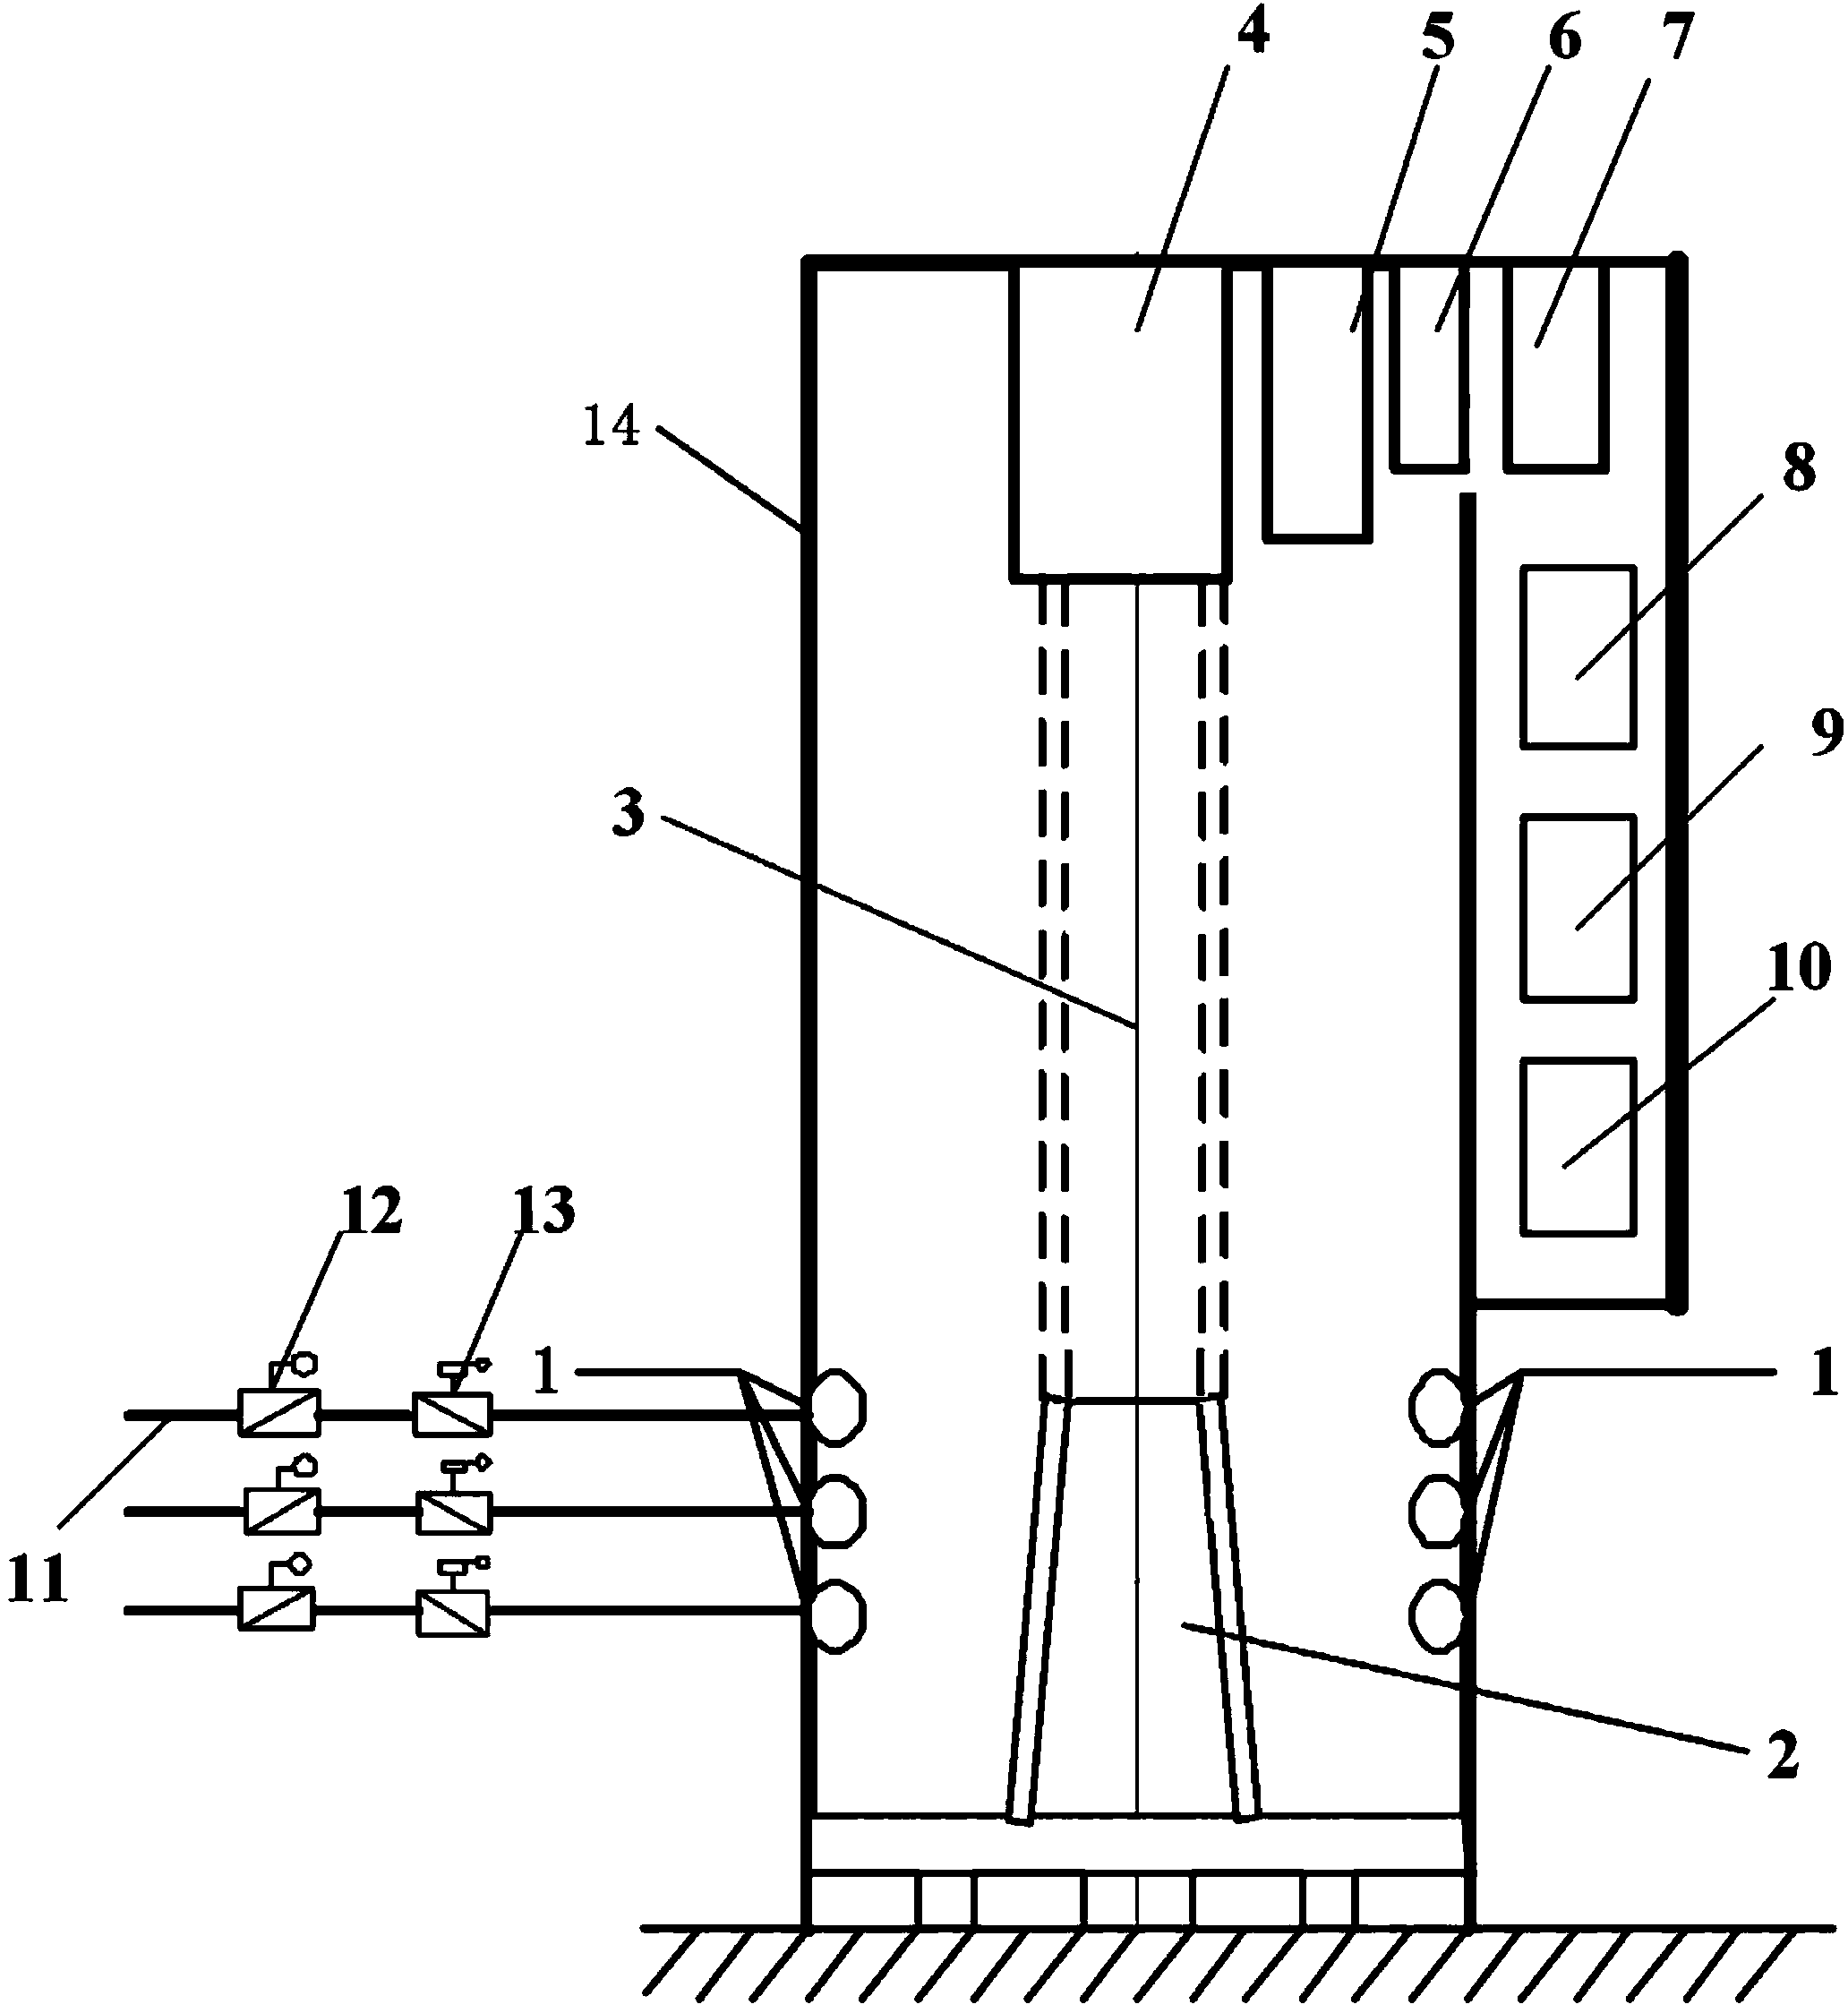 Multi-gas mixed combustion boiler and combustion method